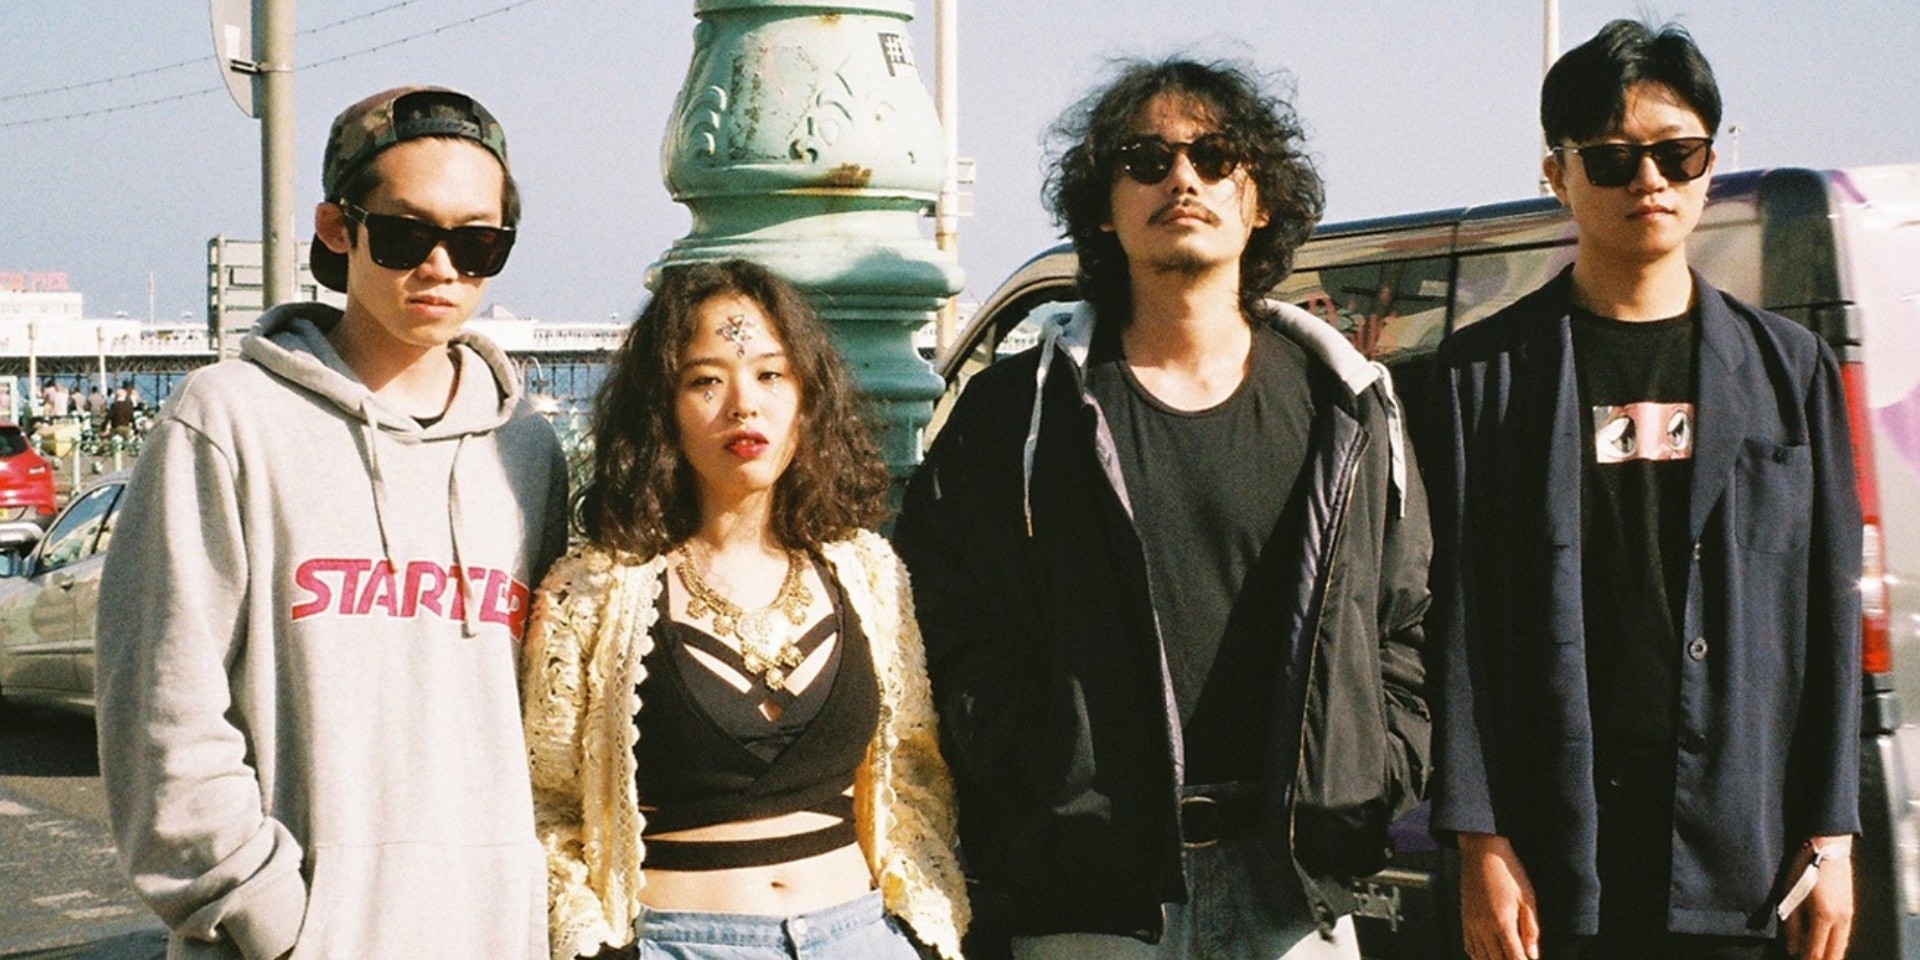 ADOY on playing at music festivals, their journey as indie artists, and future aspirations